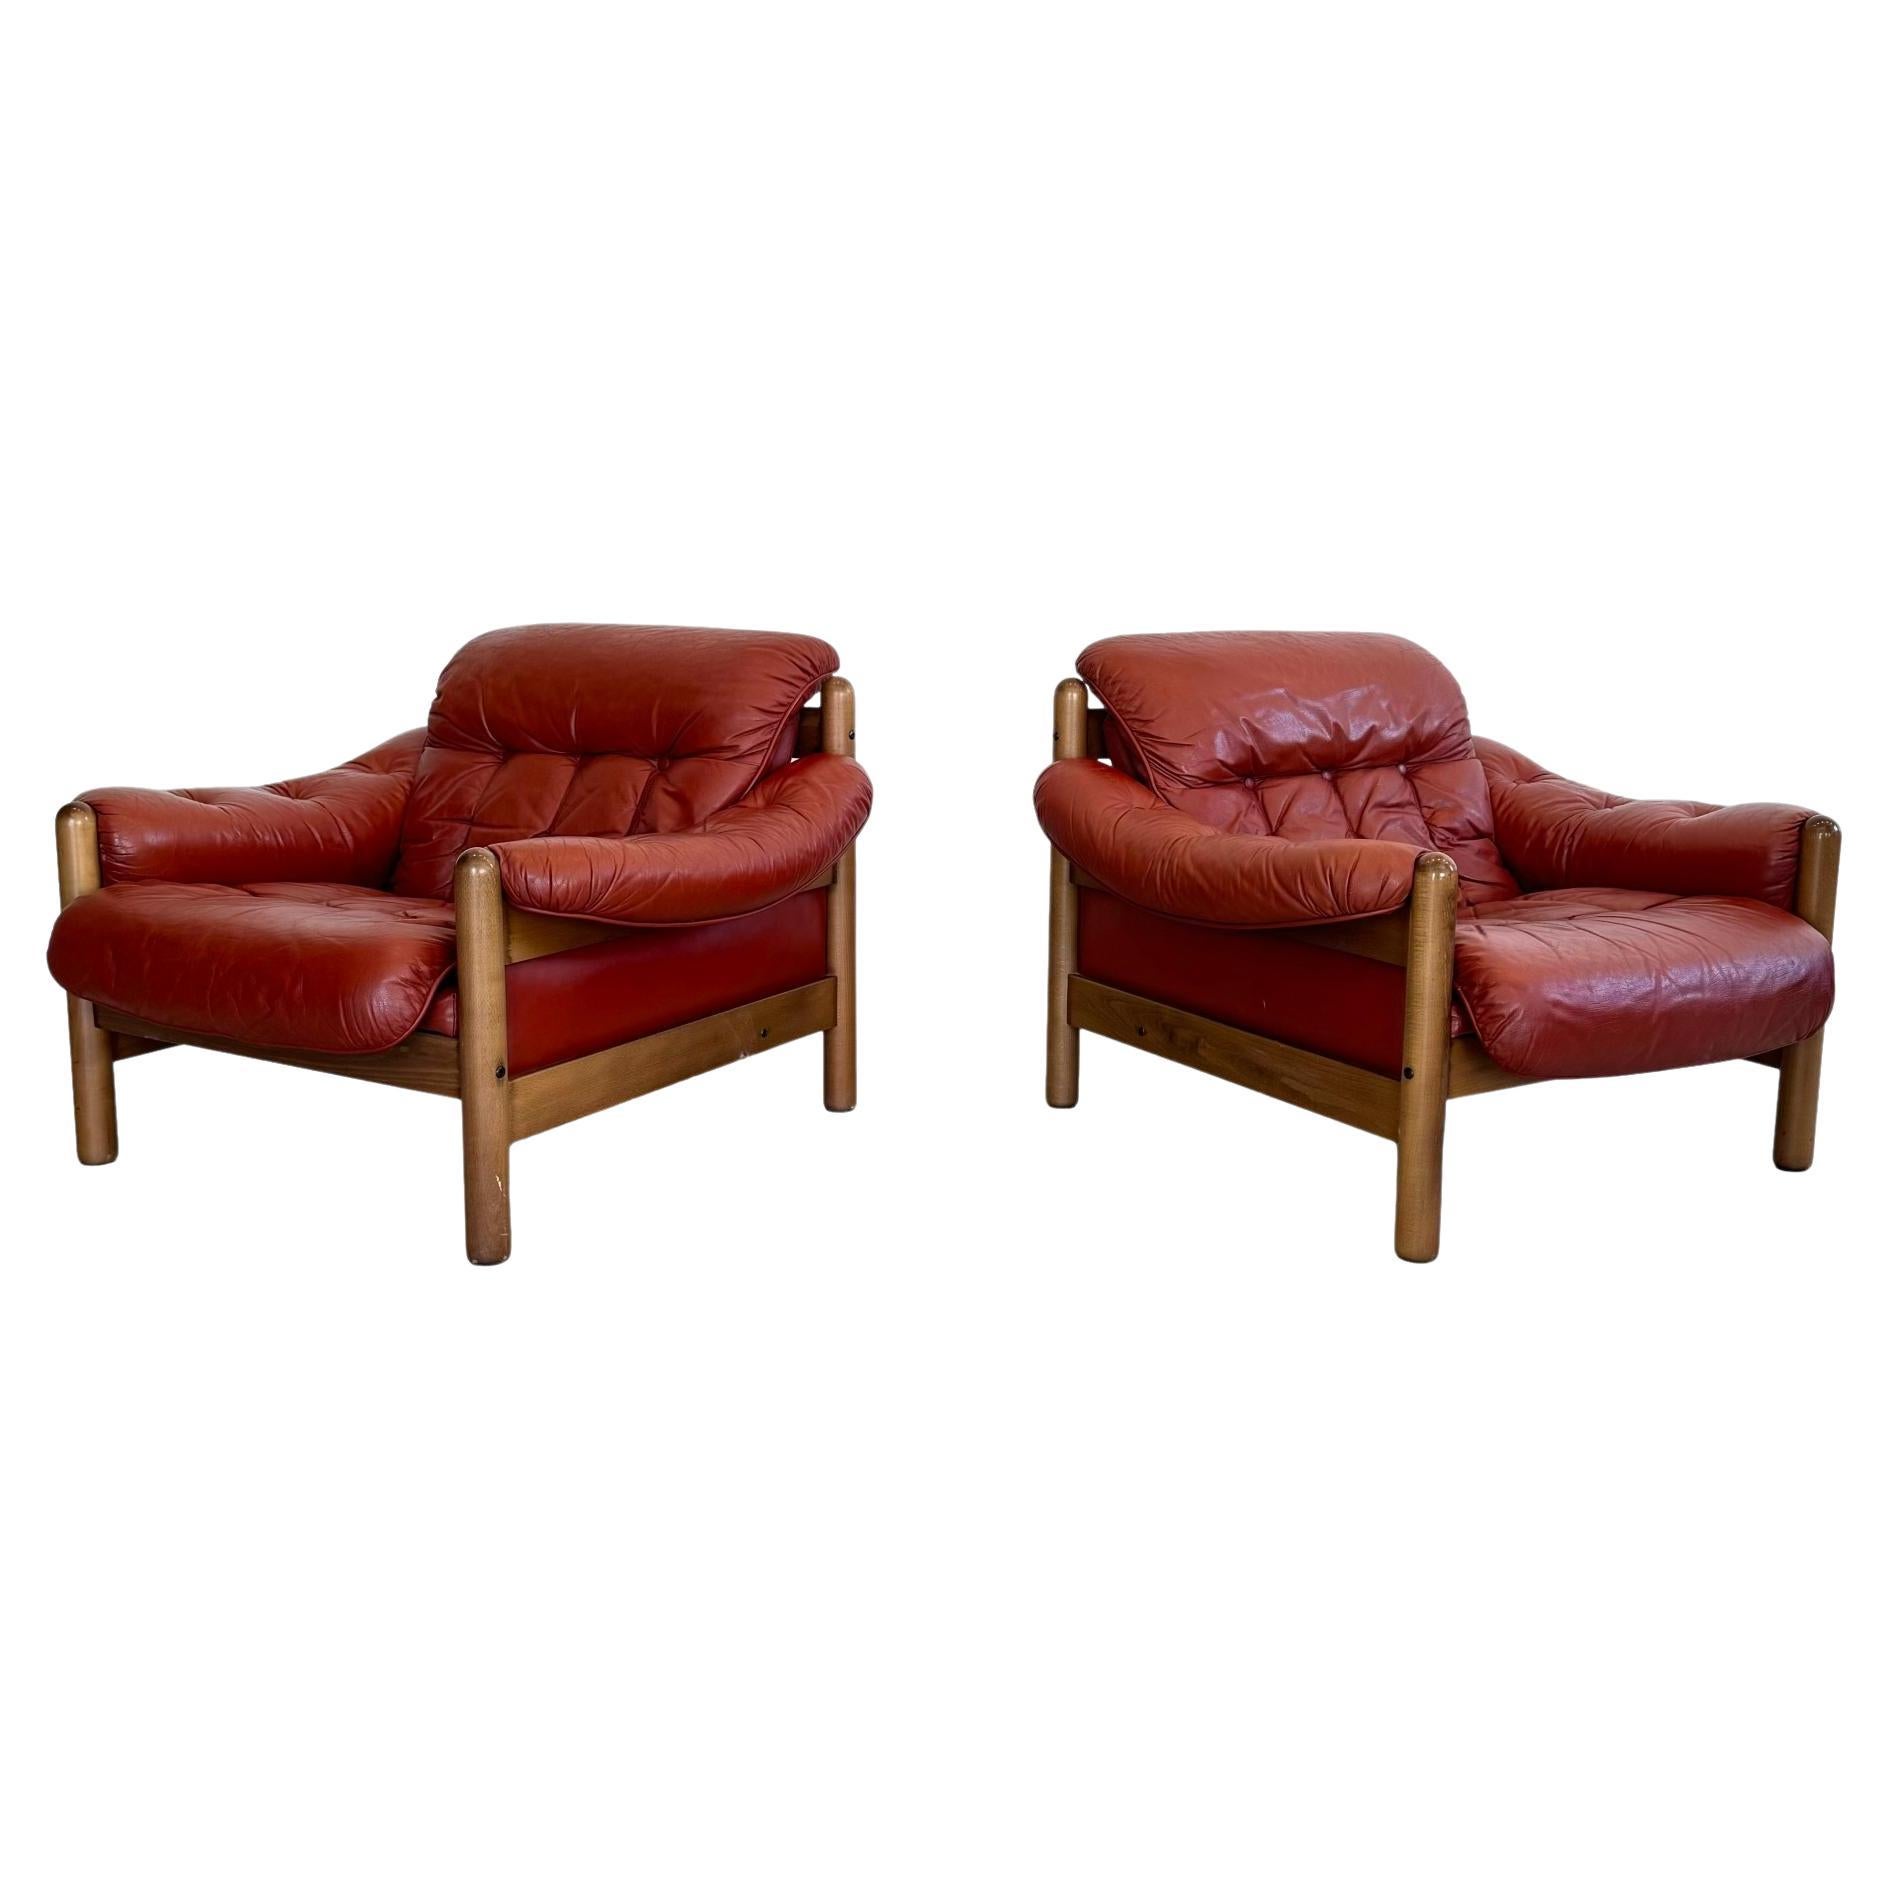  Leather and Wood Club Chairs, Sweden 1970s